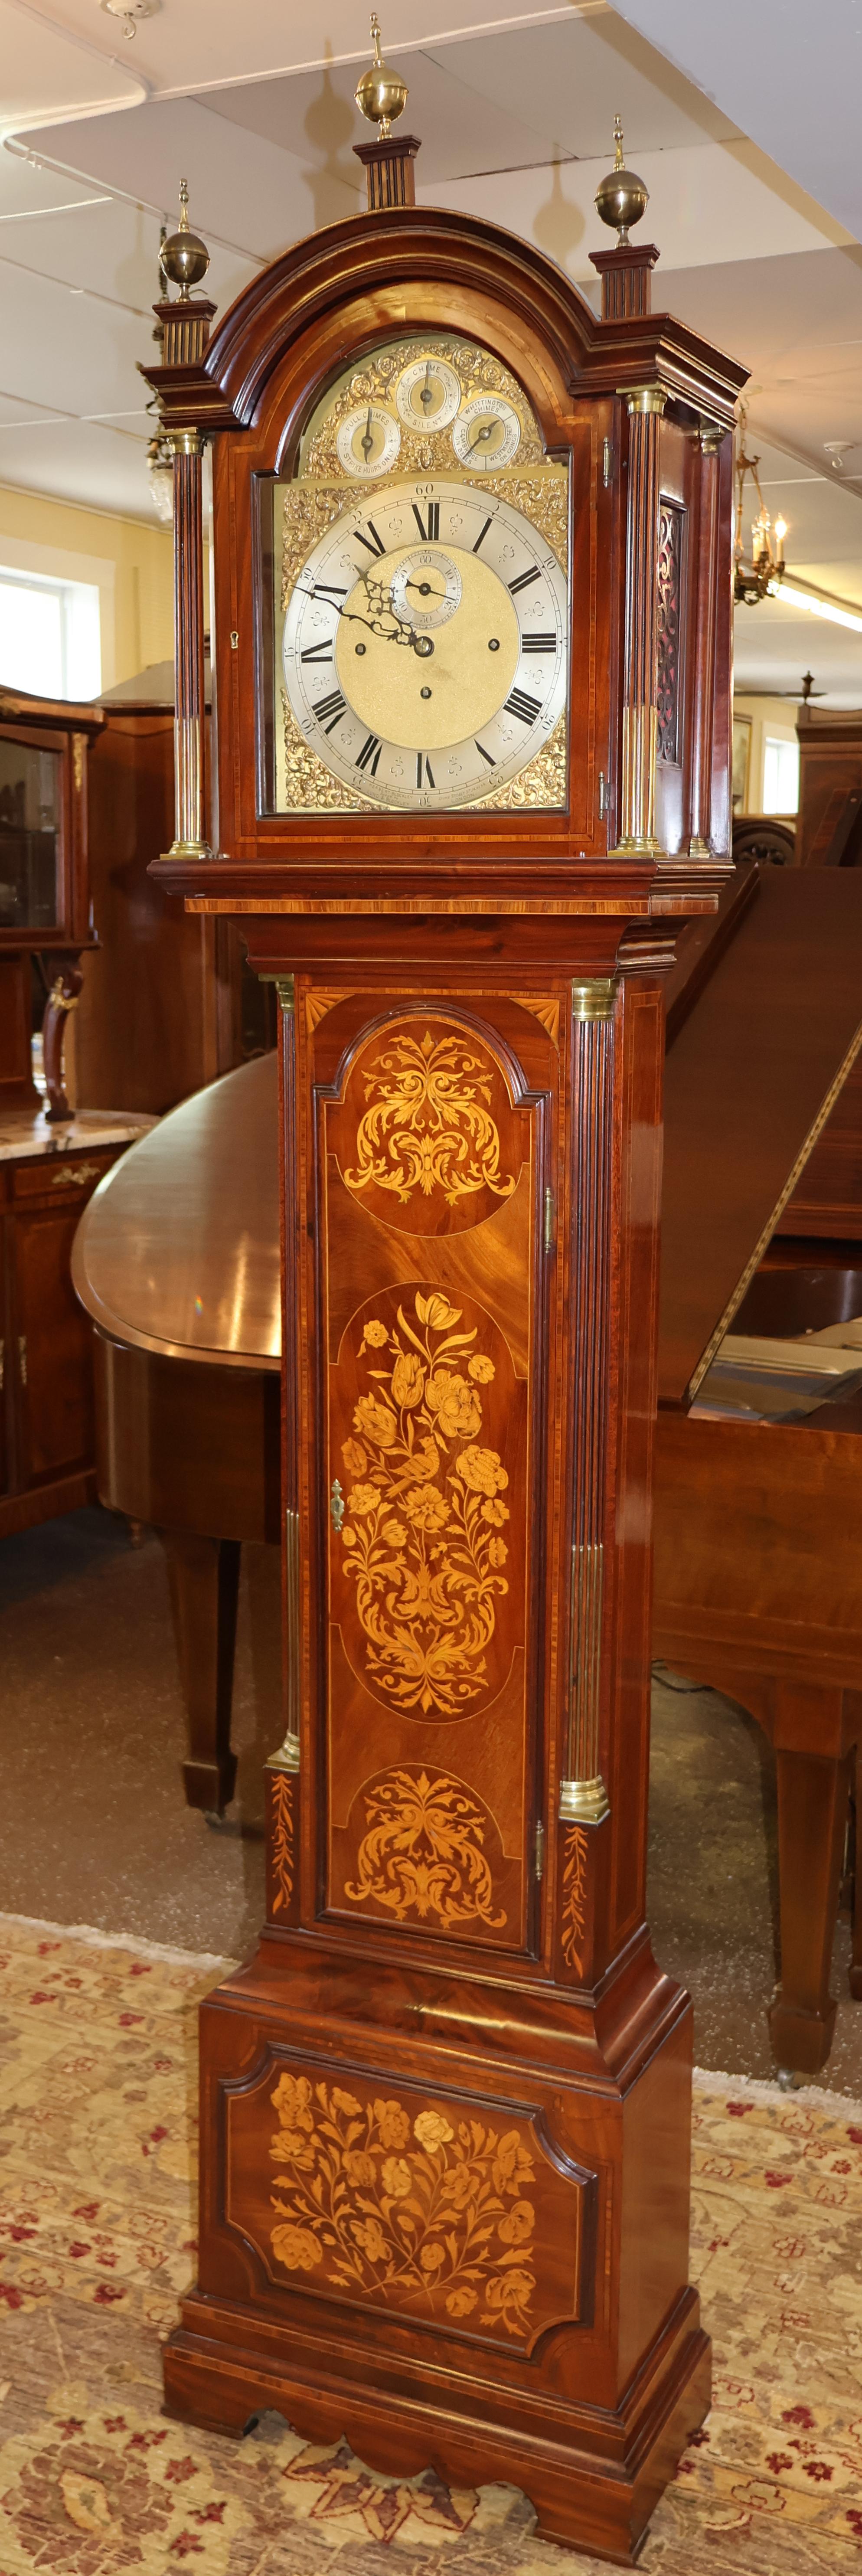 Edwardian Herbert Blockley London Musical 19th Century Inlaid Tall Case Grandfather Clock For Sale